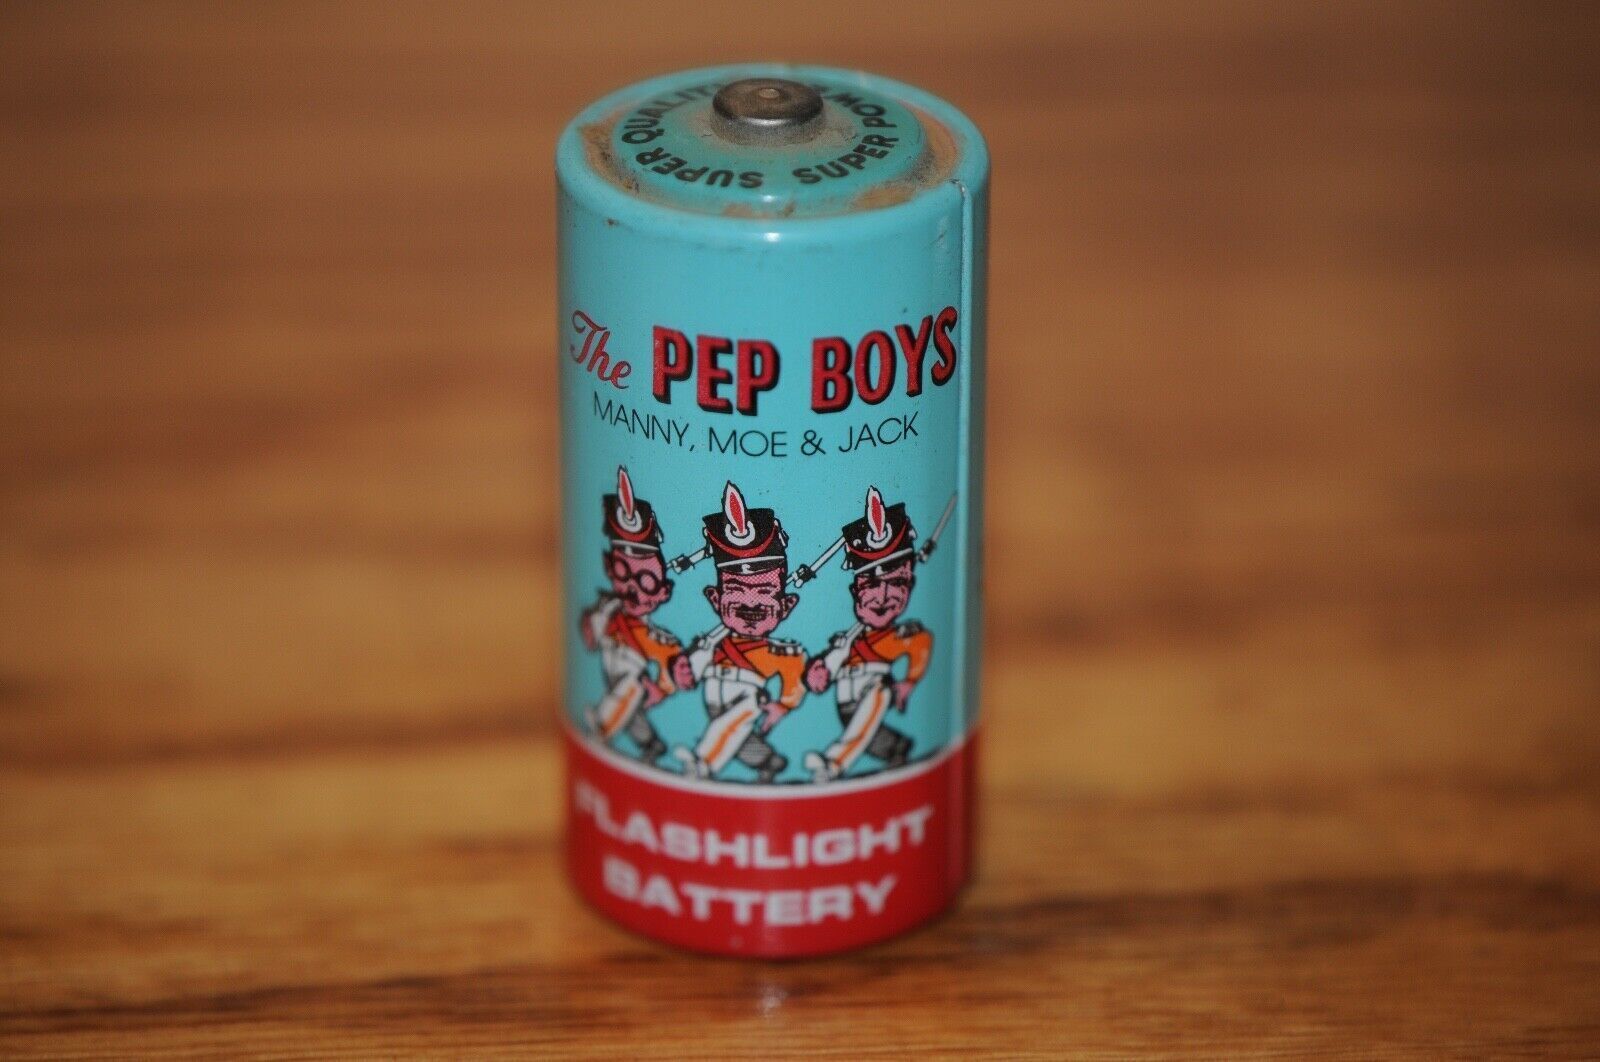 Vintage The Pep Boys Cell Flash Light Battery Super Power Super Quality Display